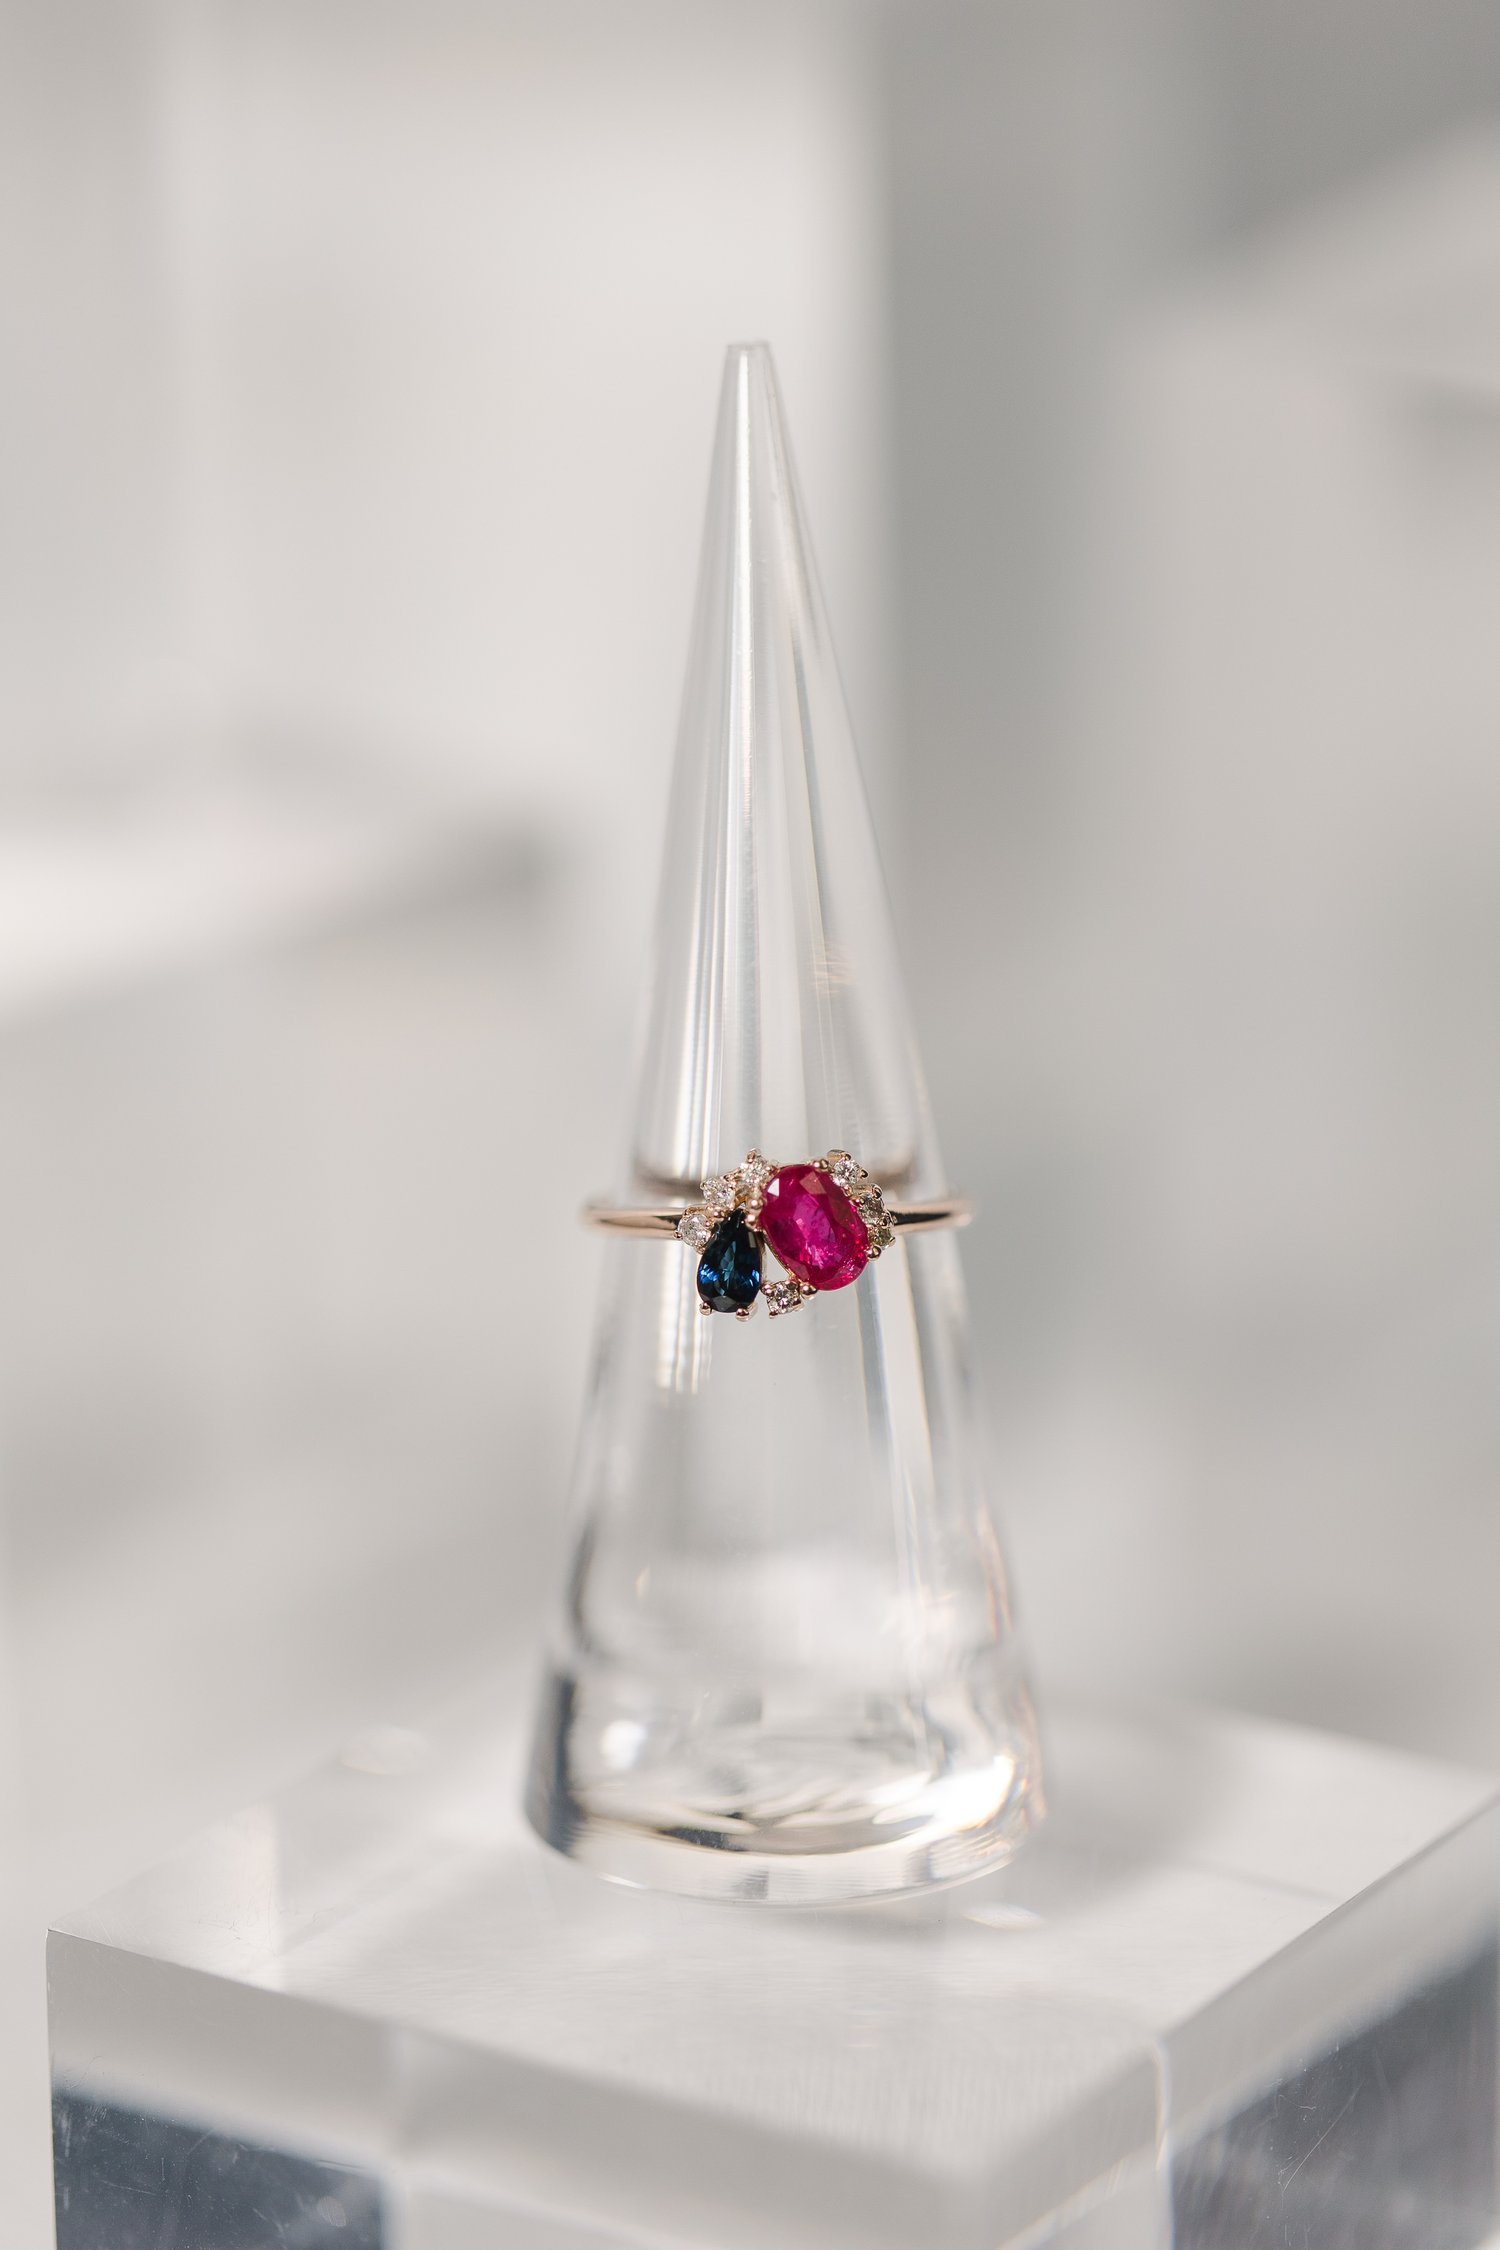 Custom made heirloom redesign cluster style ring featuring diamonds ruby and sapphire  designed by Alexandria &amp; Company fine jewelers